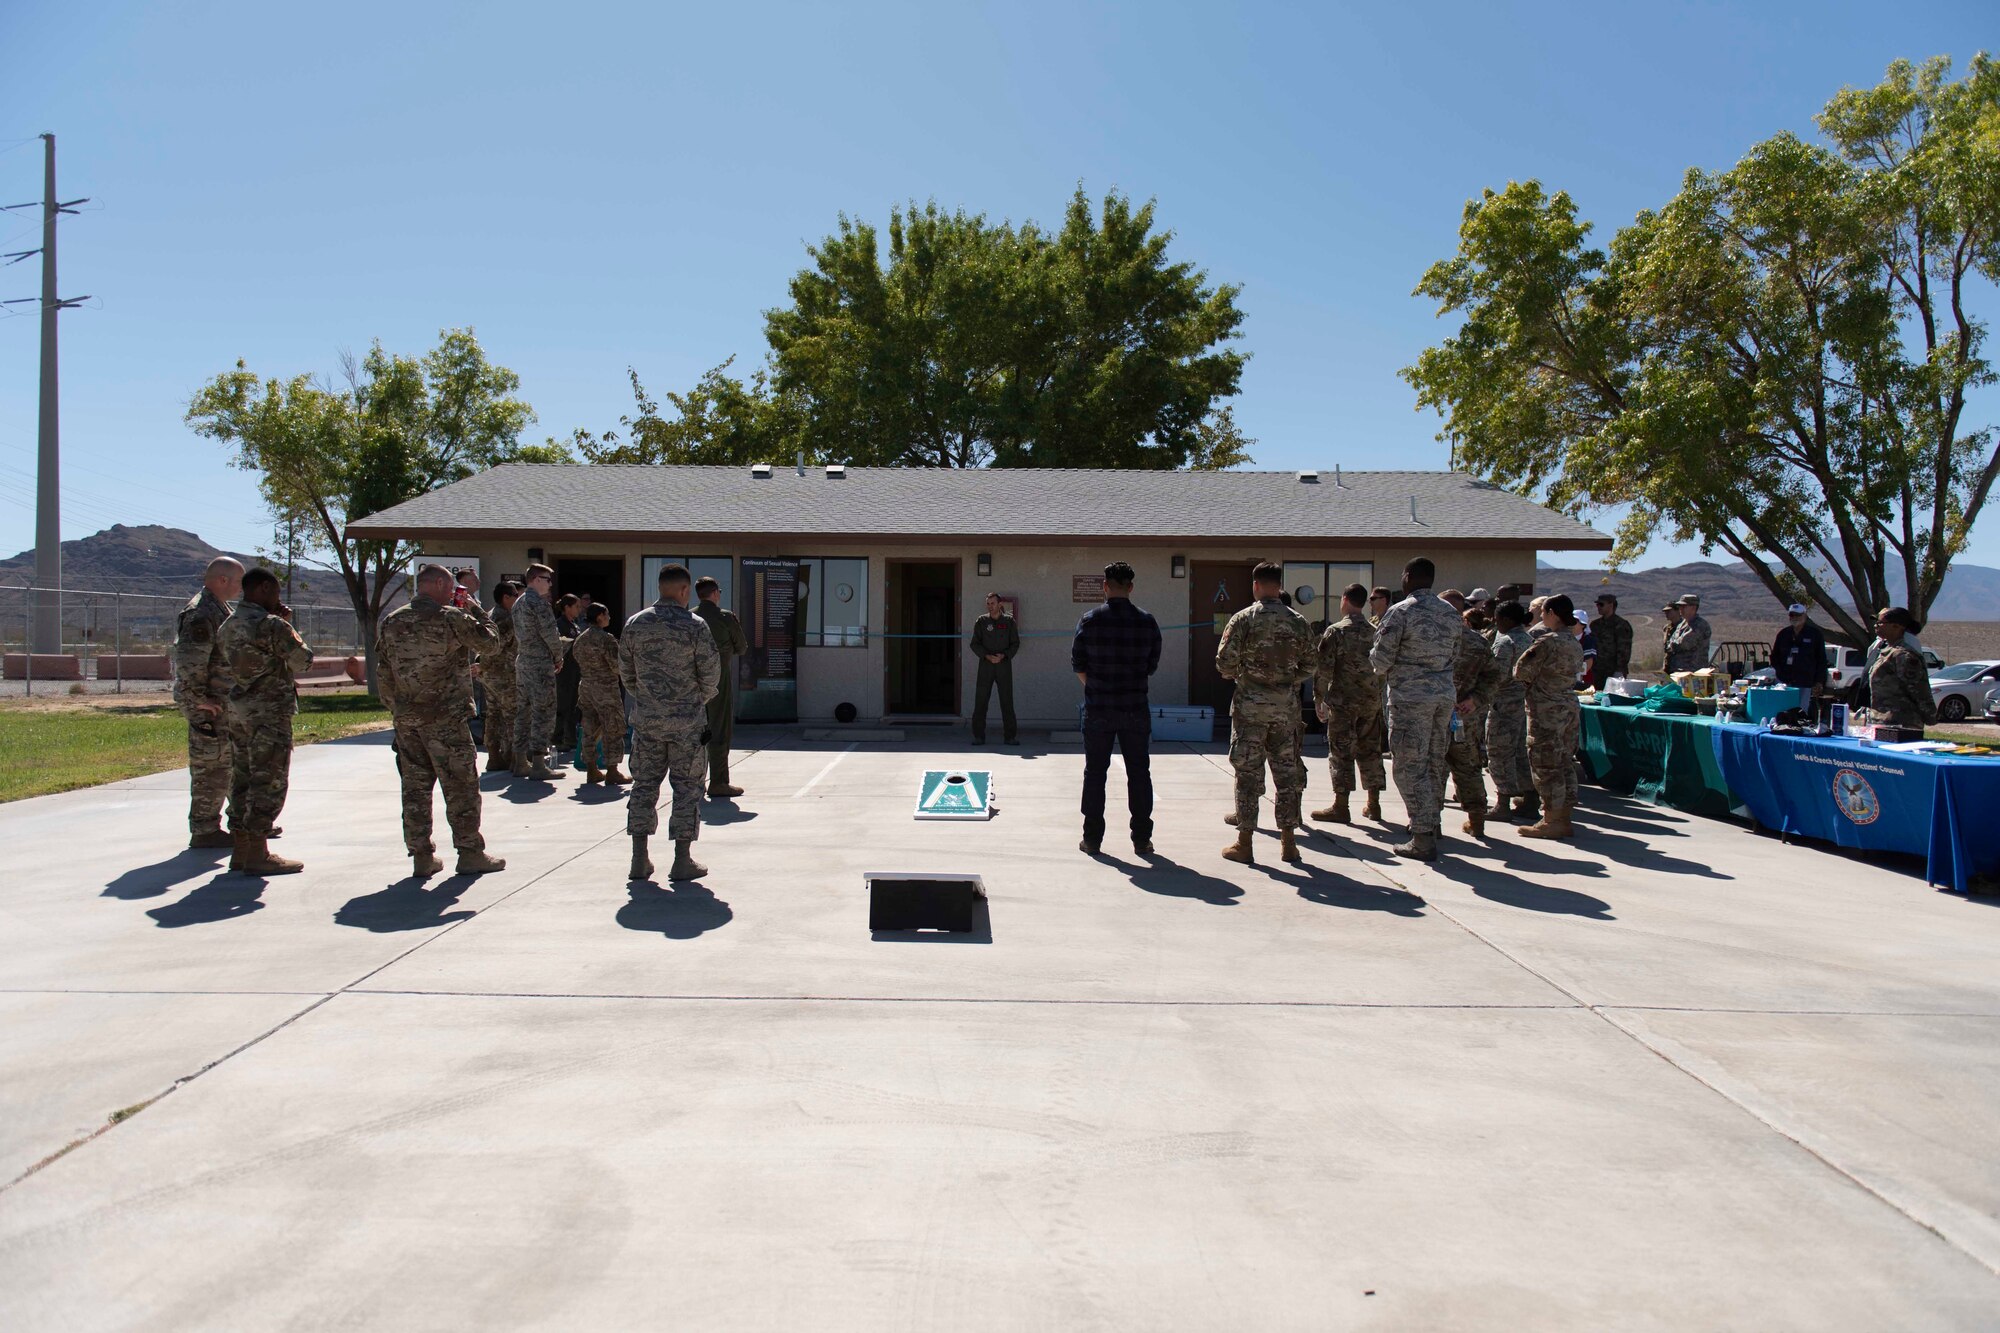 Col. James Price, 432nd Wing/432nd vice commander Air Expeditionary Wing, discussed the importance of taking care of our people at the new Sexual Assault Prevention and Response Office opening at Creech Air Force Base, Nevada, Sept. 30, 2019. During the grand opening, Creech personnel ate barbeque provided by the USO, learned about the resources offered by the SAPR Office and toured the new facility. (U.S. Air Force photo by Senior Airman Lauren Silverthorne)